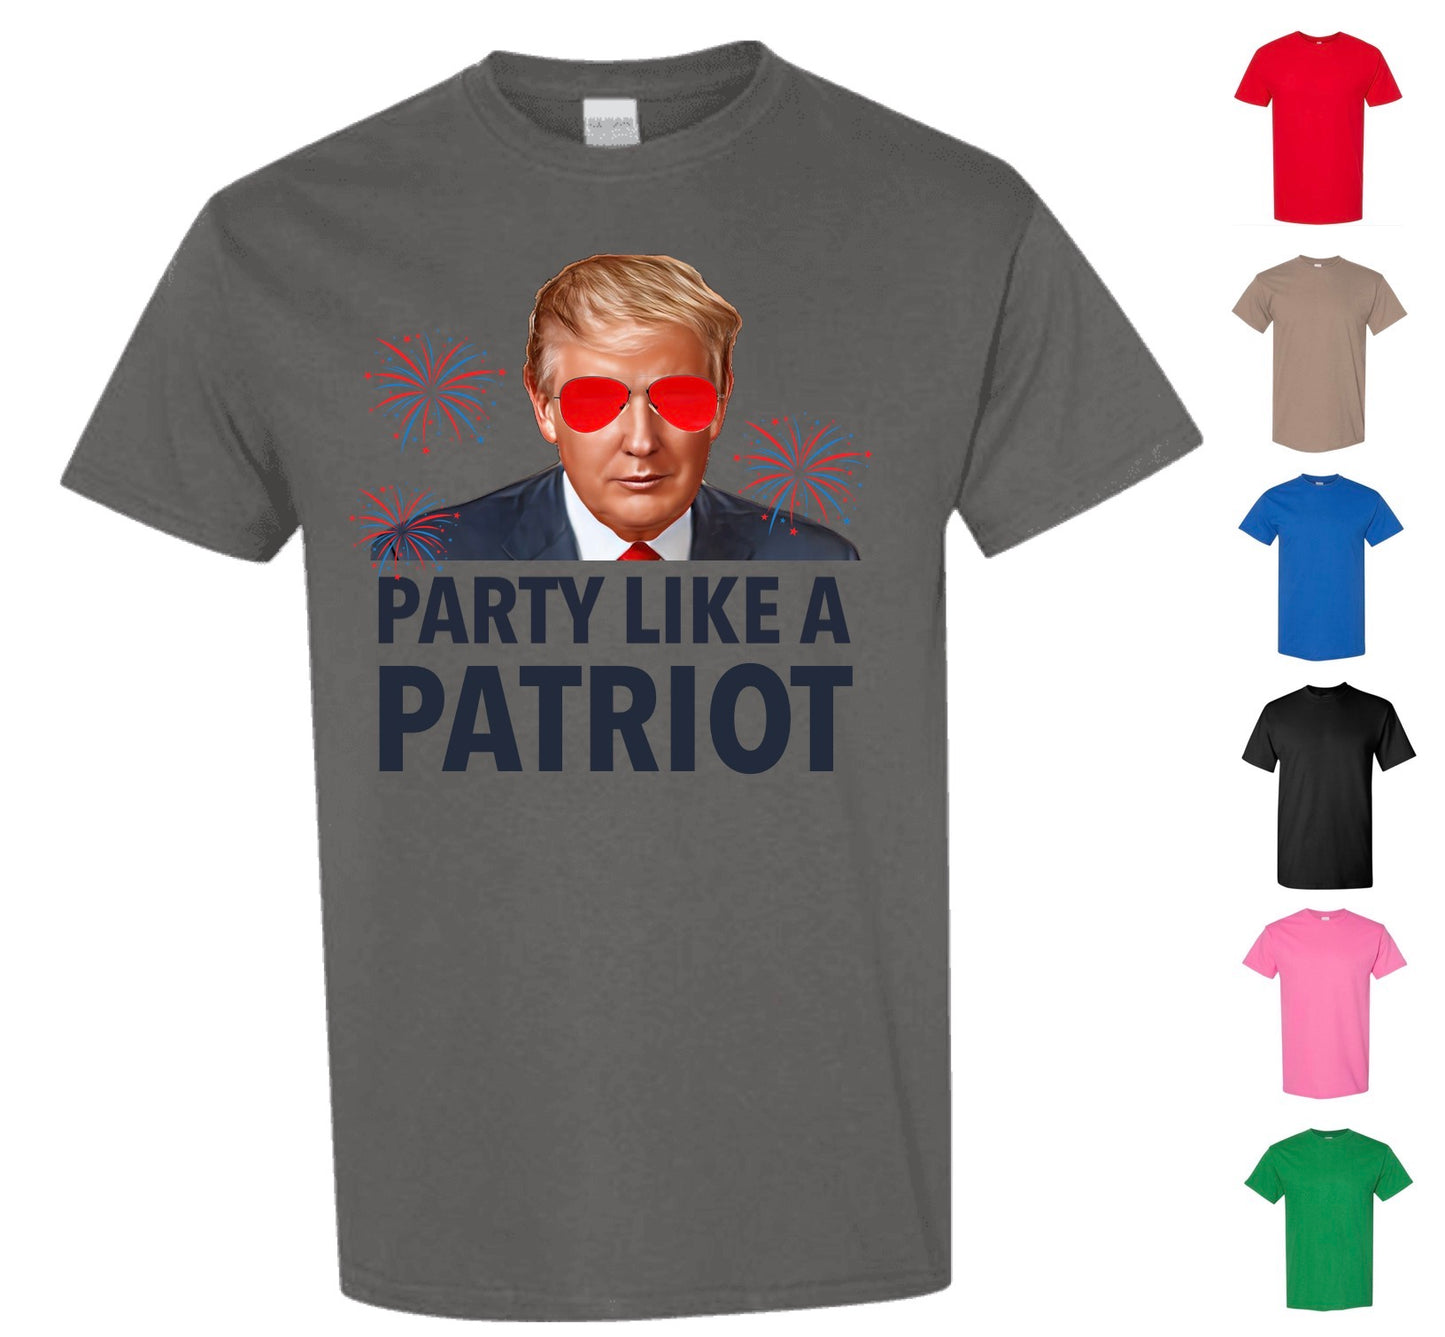 Party Like A Patriot Trump T-Shirt, 4th of July (Free Shipping)